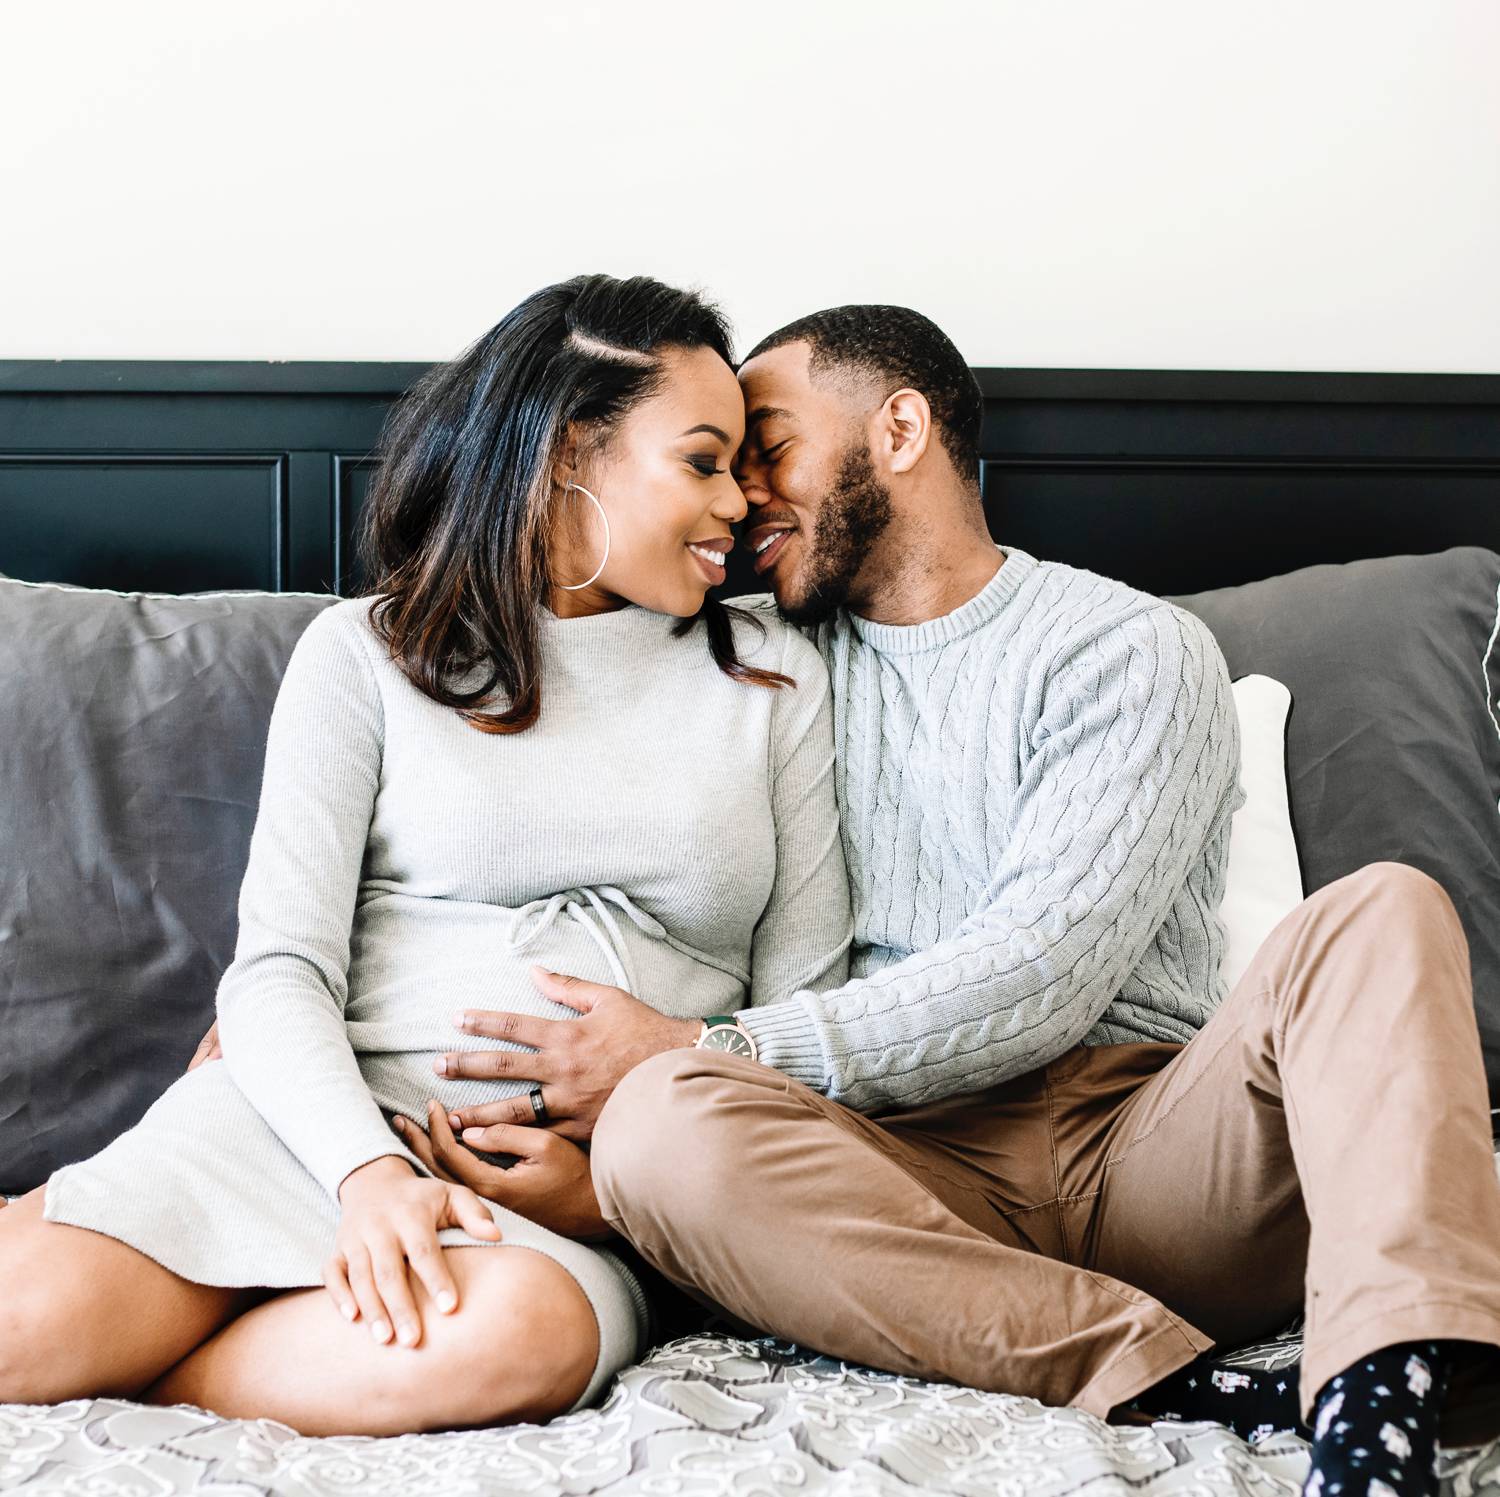 Sasha Q. Photography uses simple indoor poses when photographing expectant parents